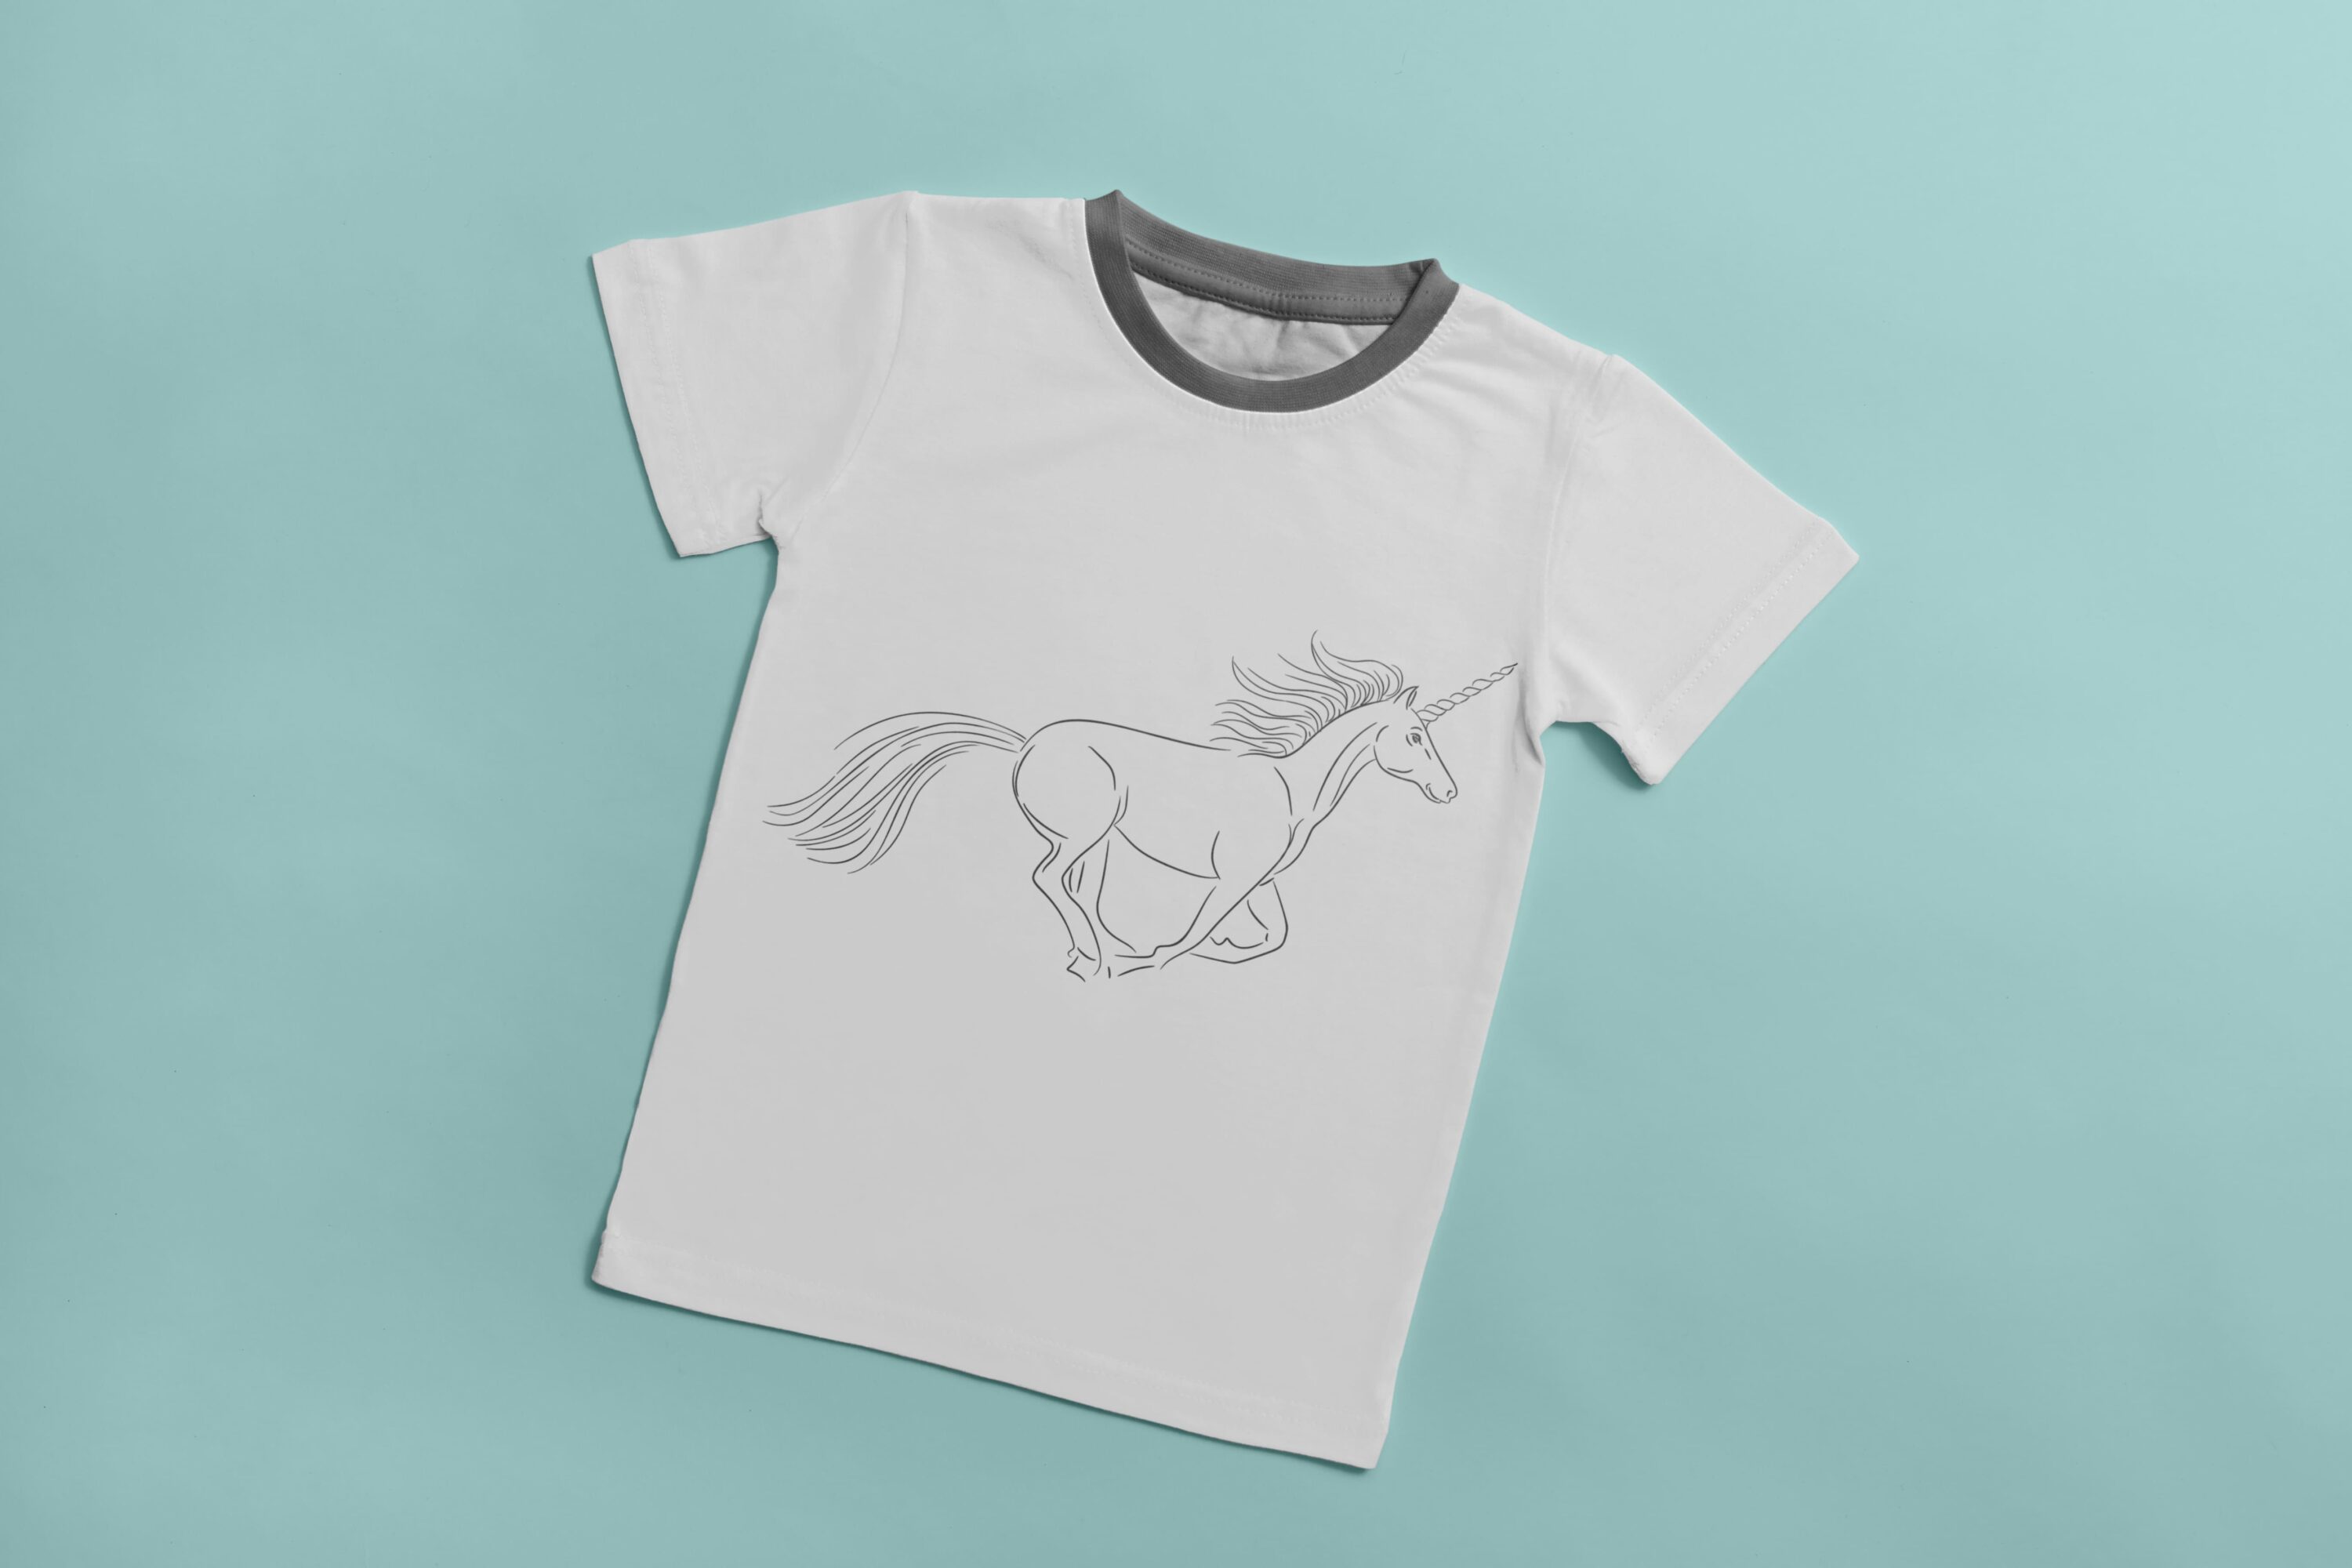 White t-shirt with a gray collar and a gray silhouette of a running unicorn on a light blue background.